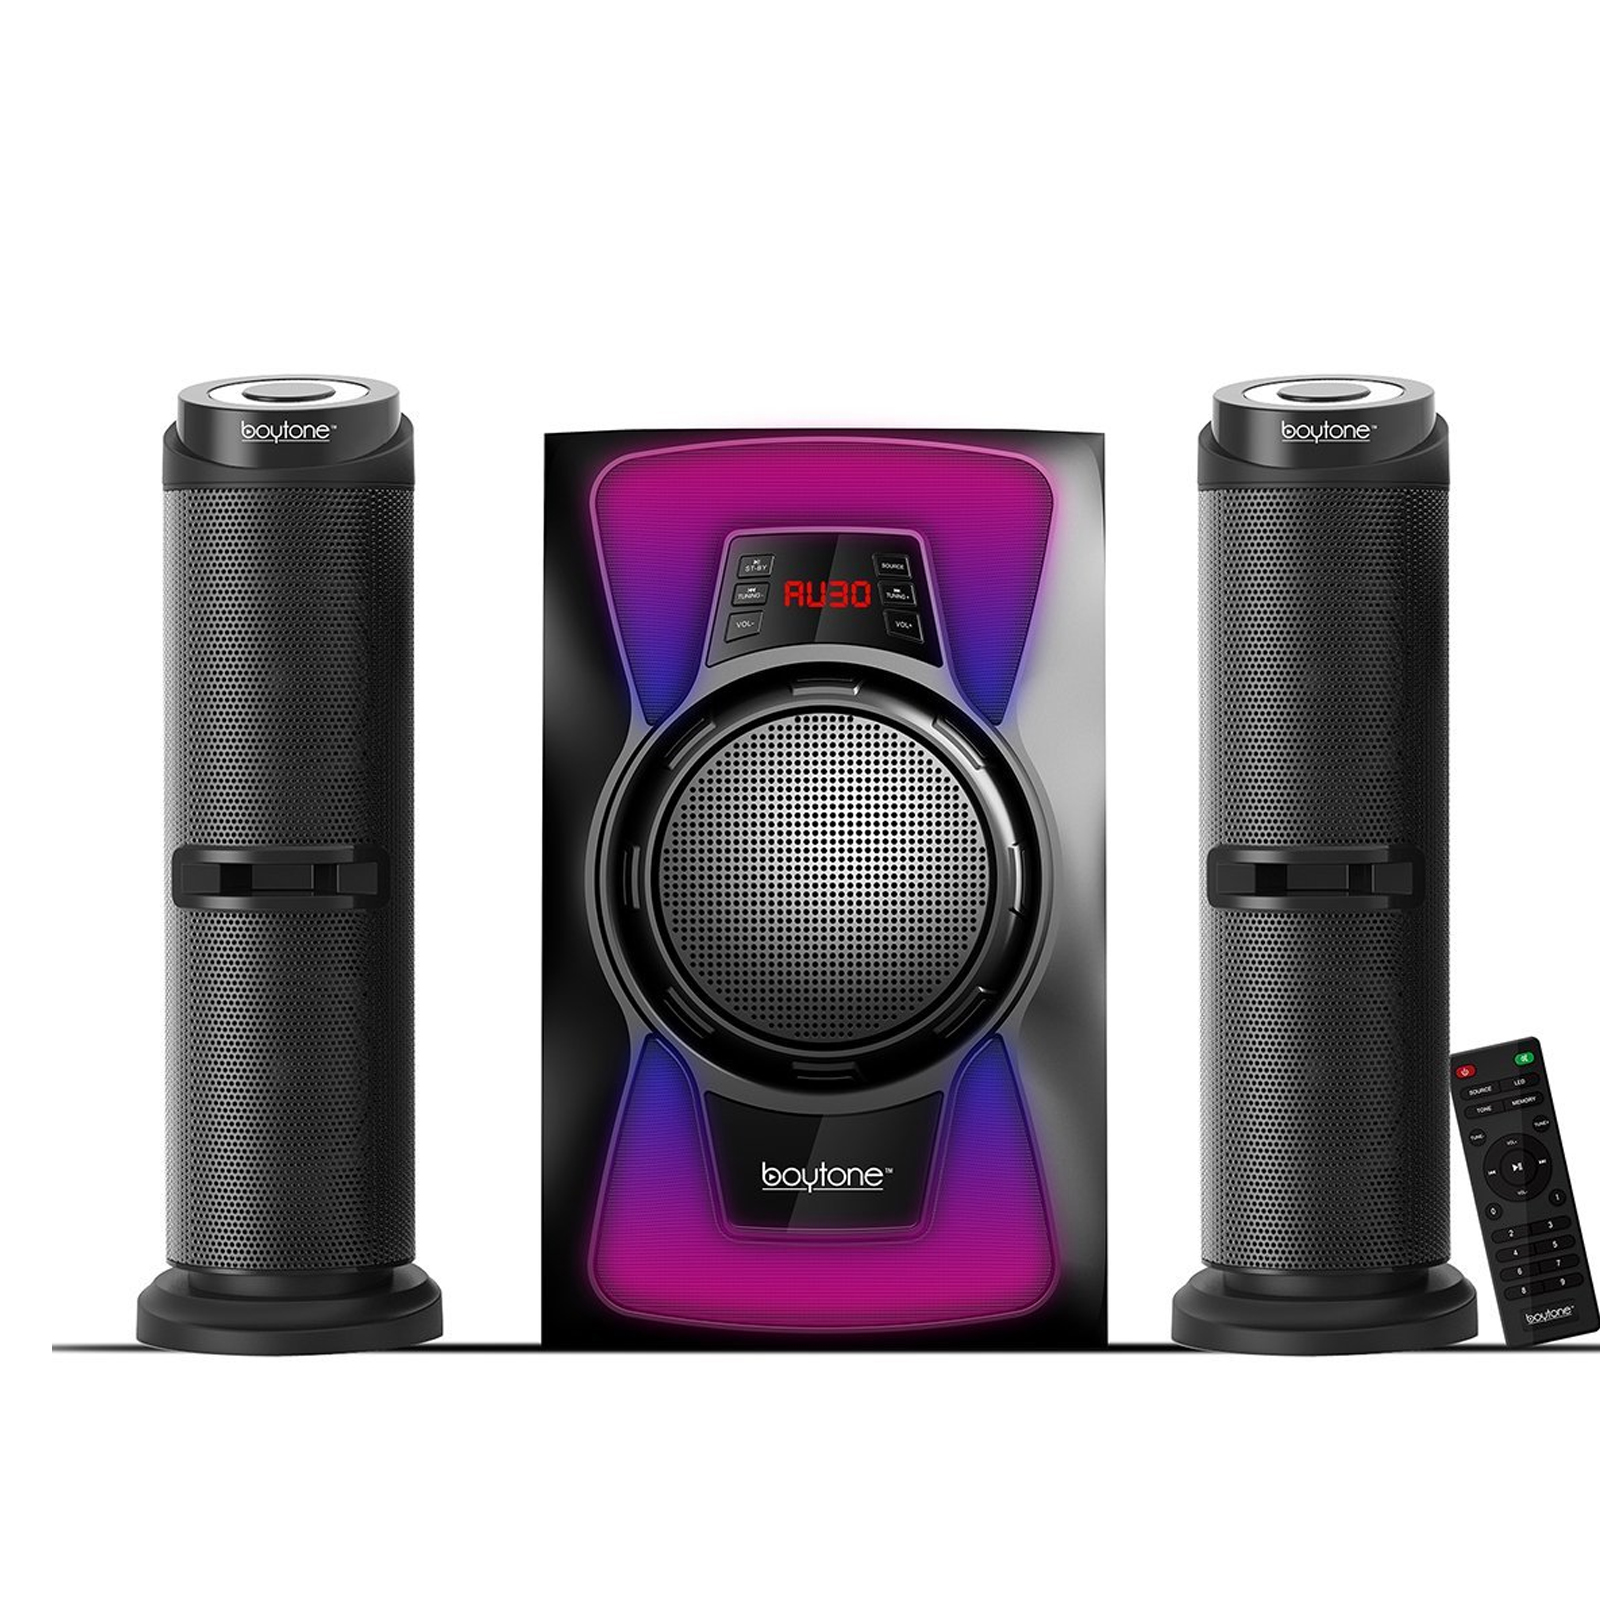 Boytone 2.1 BT Powerful Home Theater Speaker System with FM Radio - image 1 of 1